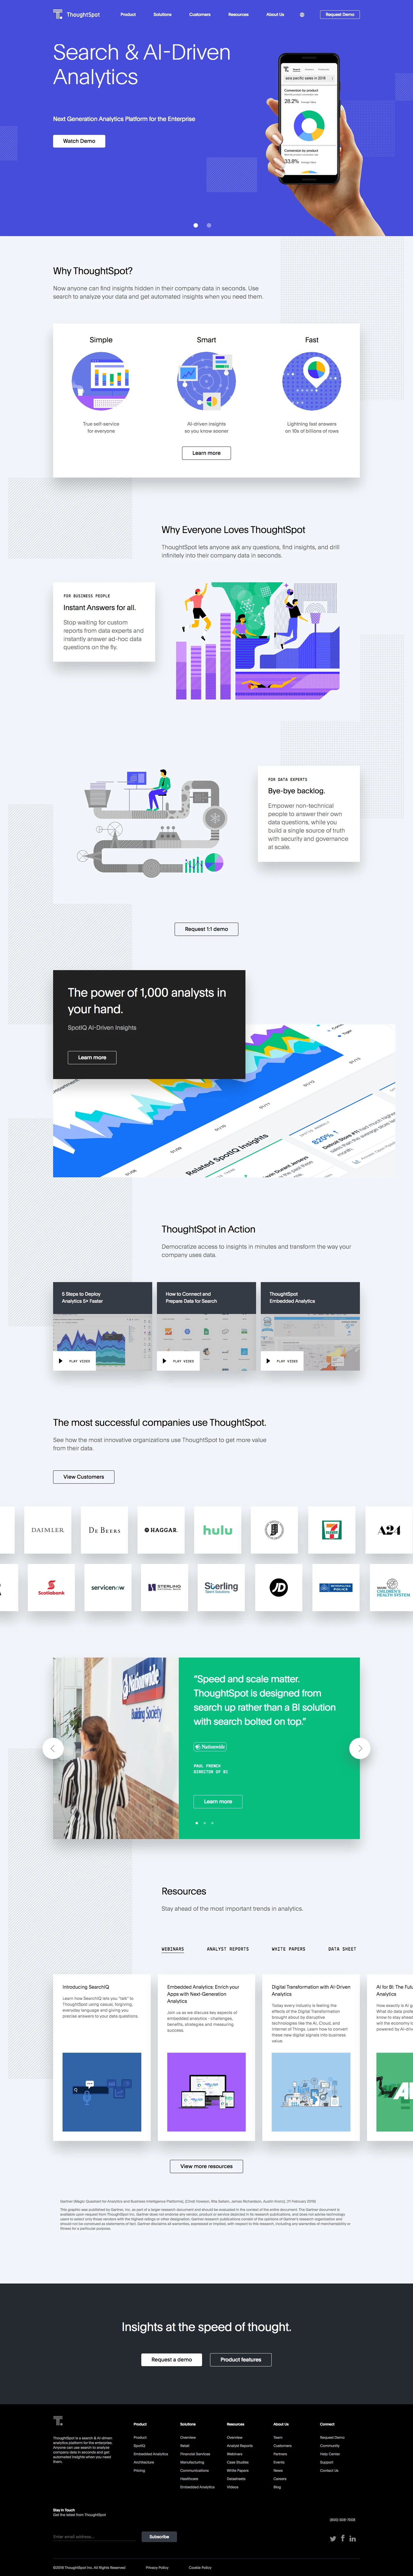 ThoughtSpot Landing Page Example: A business intelligence and big data analytics platform that helps you explore, analyze and share real-time business analytics data easily